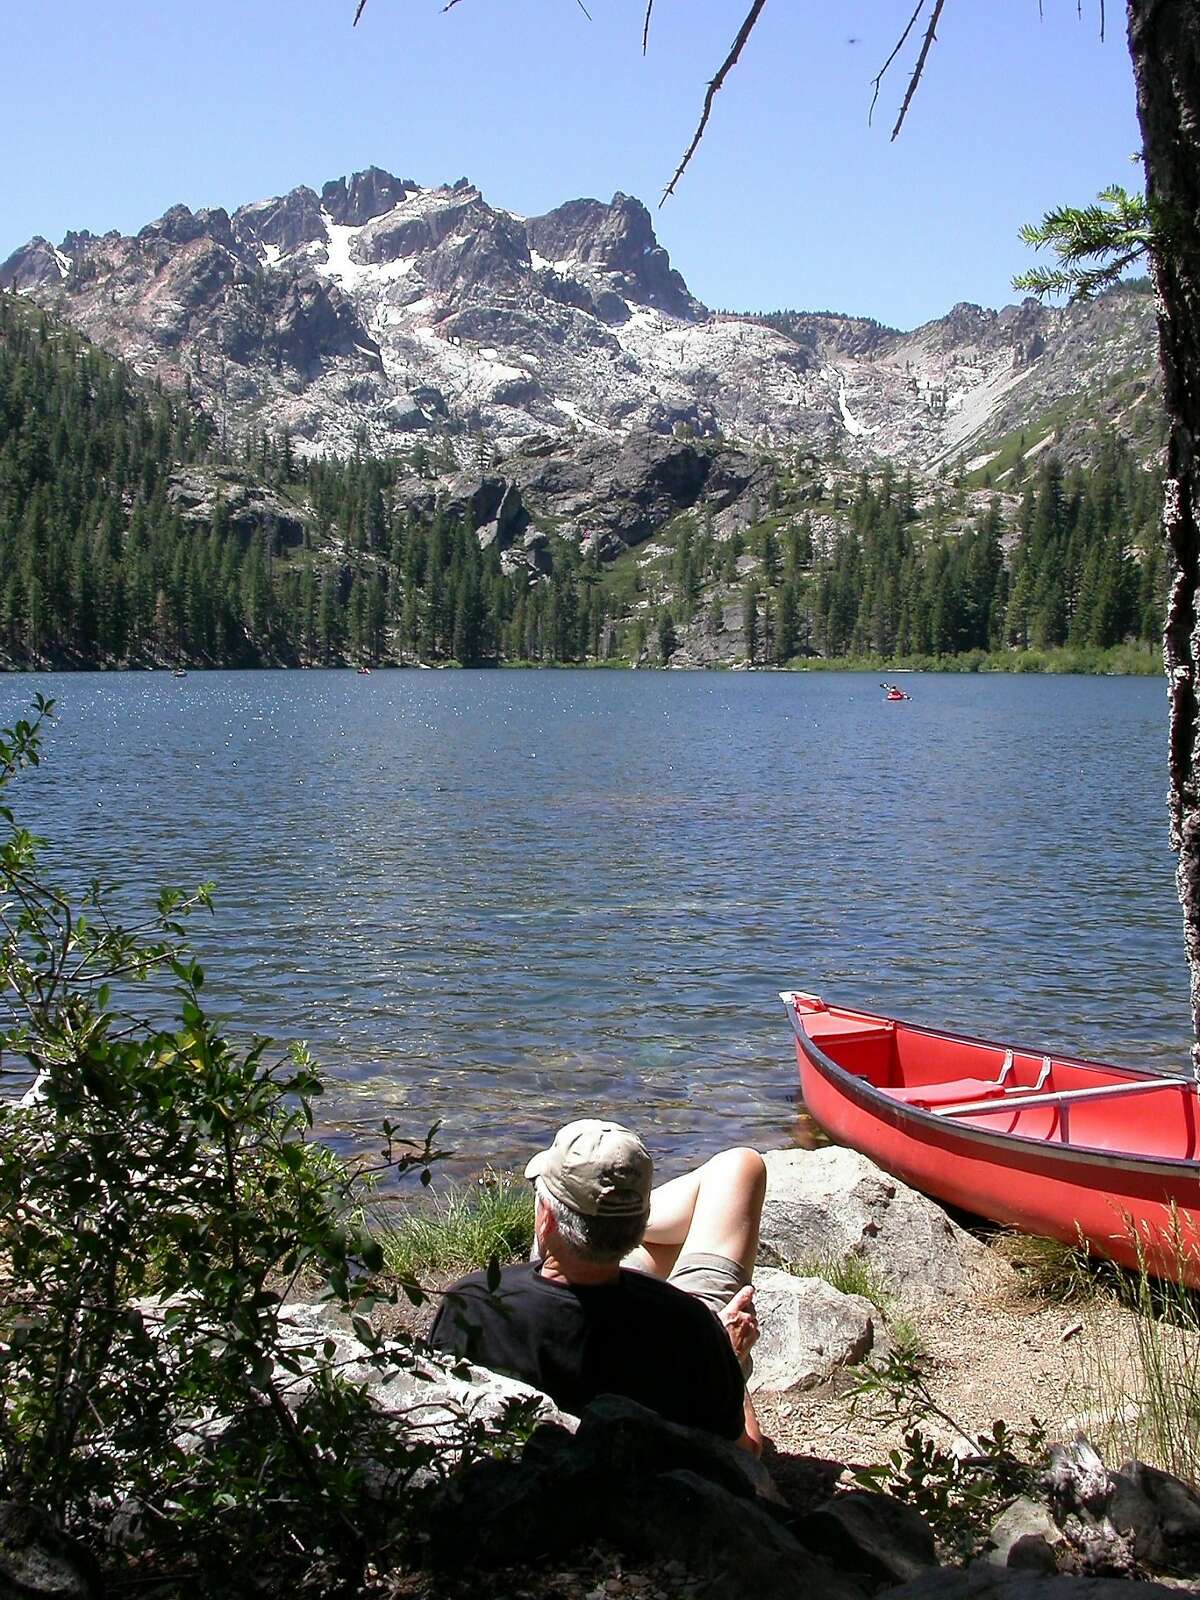 The Sierra Buttes loom over Lower Sardine Lake, where visitors can canoe, kayak, putt around in a small boat or just gaze at the scenery.